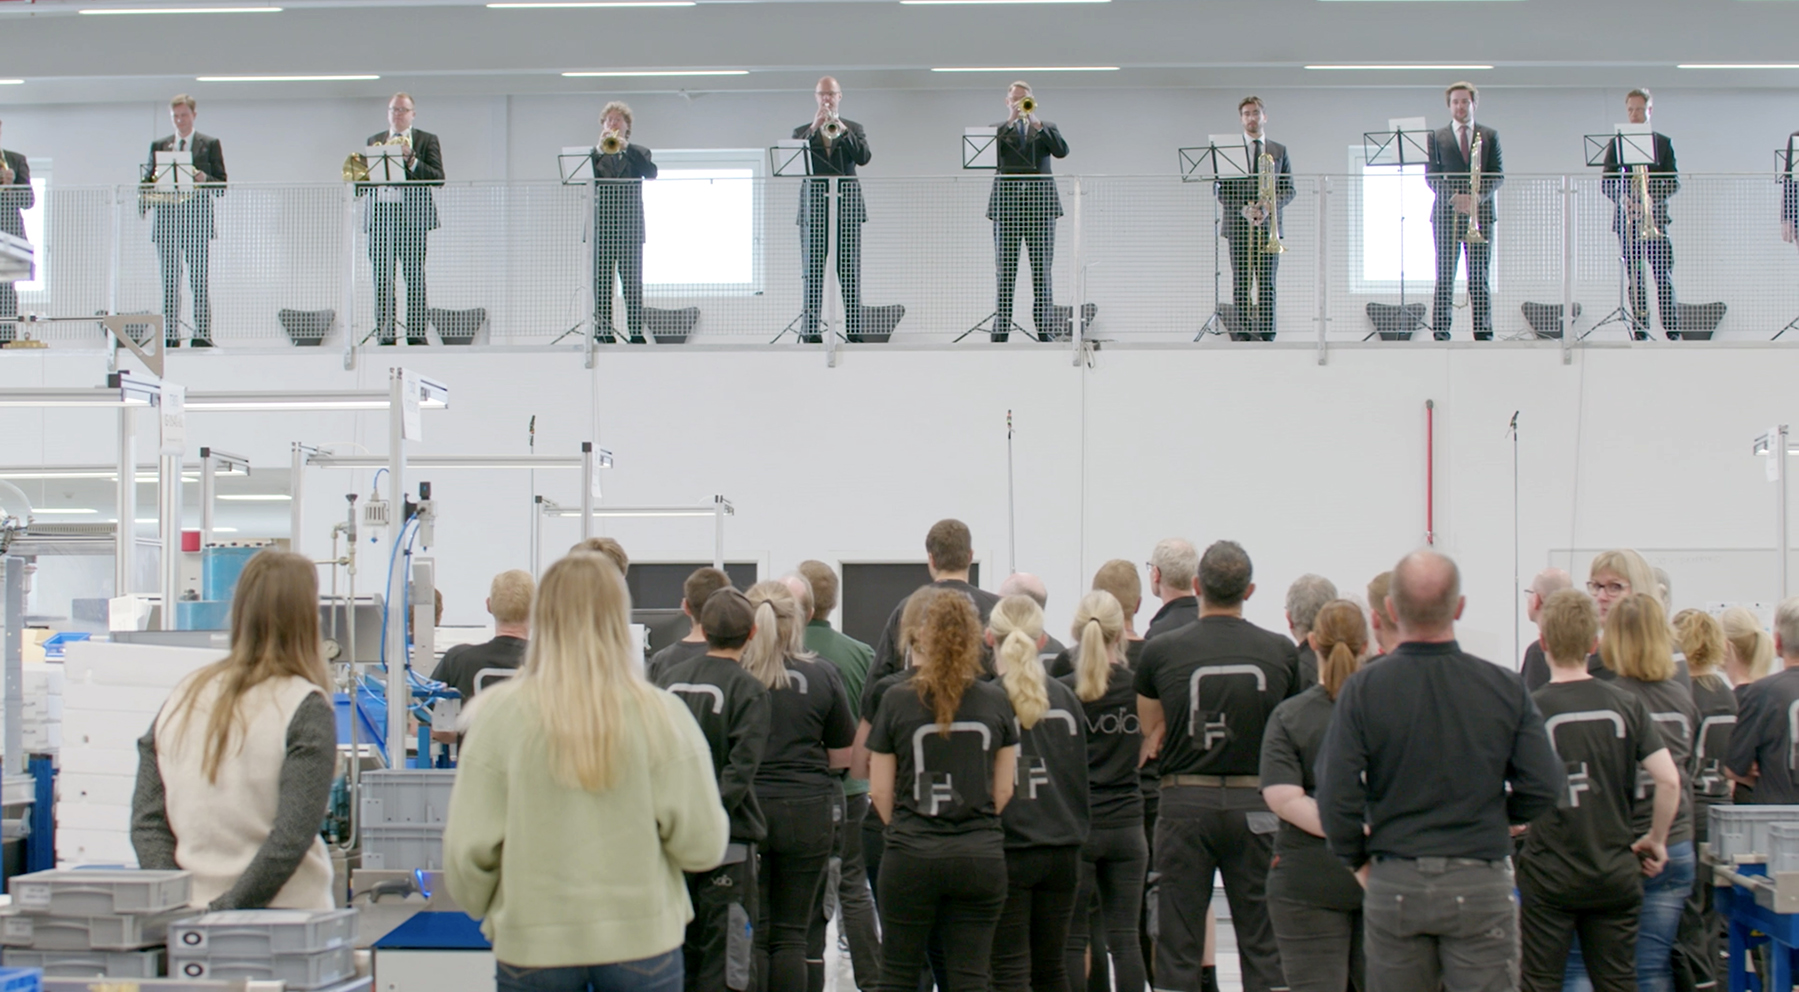 Factory workers in Horsens surprised by Aarhus Symphony Orchestra flash mob